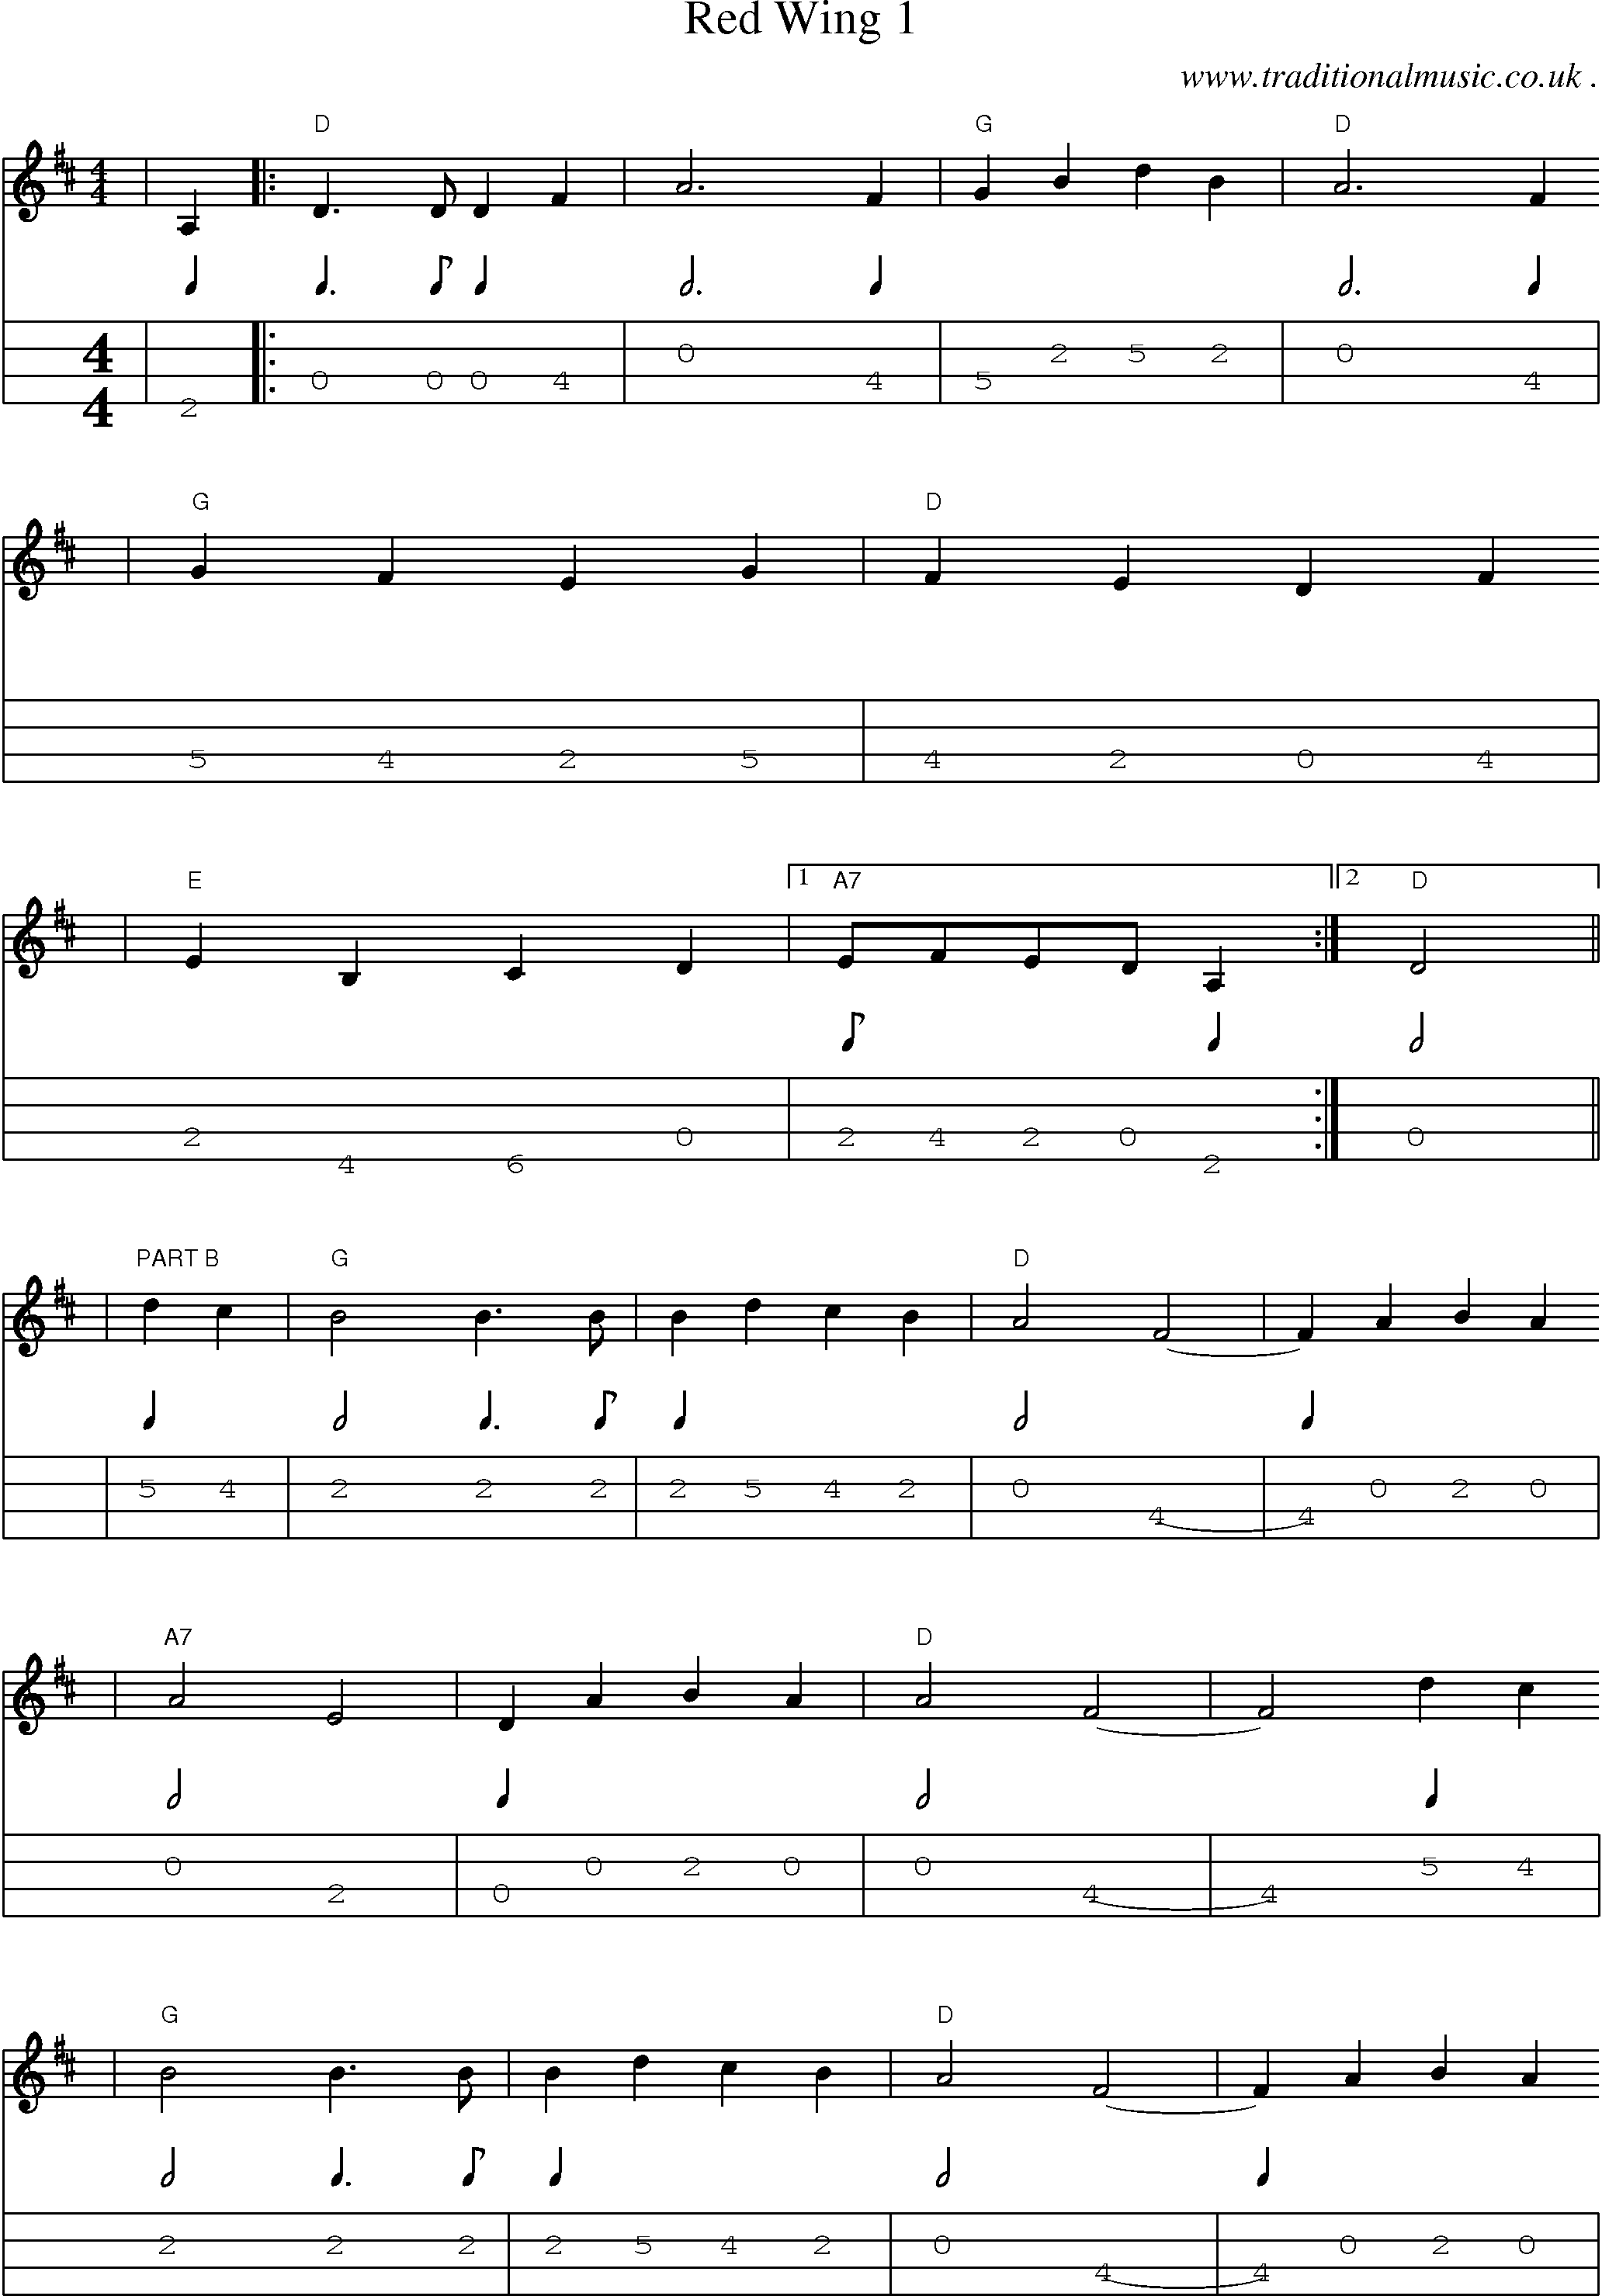 Music Score and Mandolin Tabs for Red Wing 1